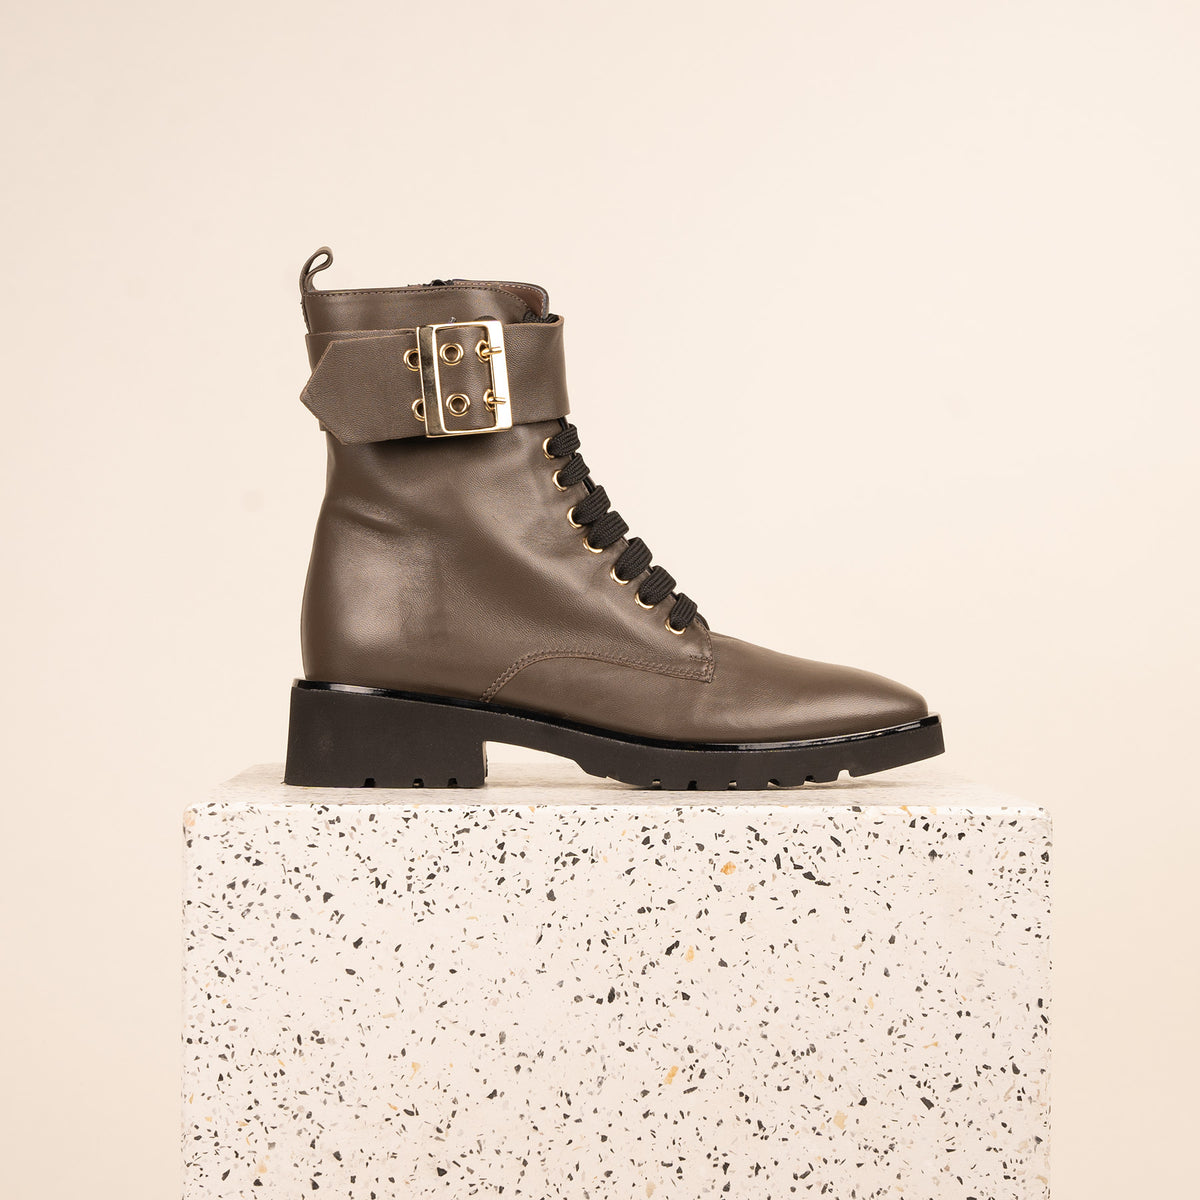 Asti Sport - Moss Leather with Buckle (Final sale with code BFCM)